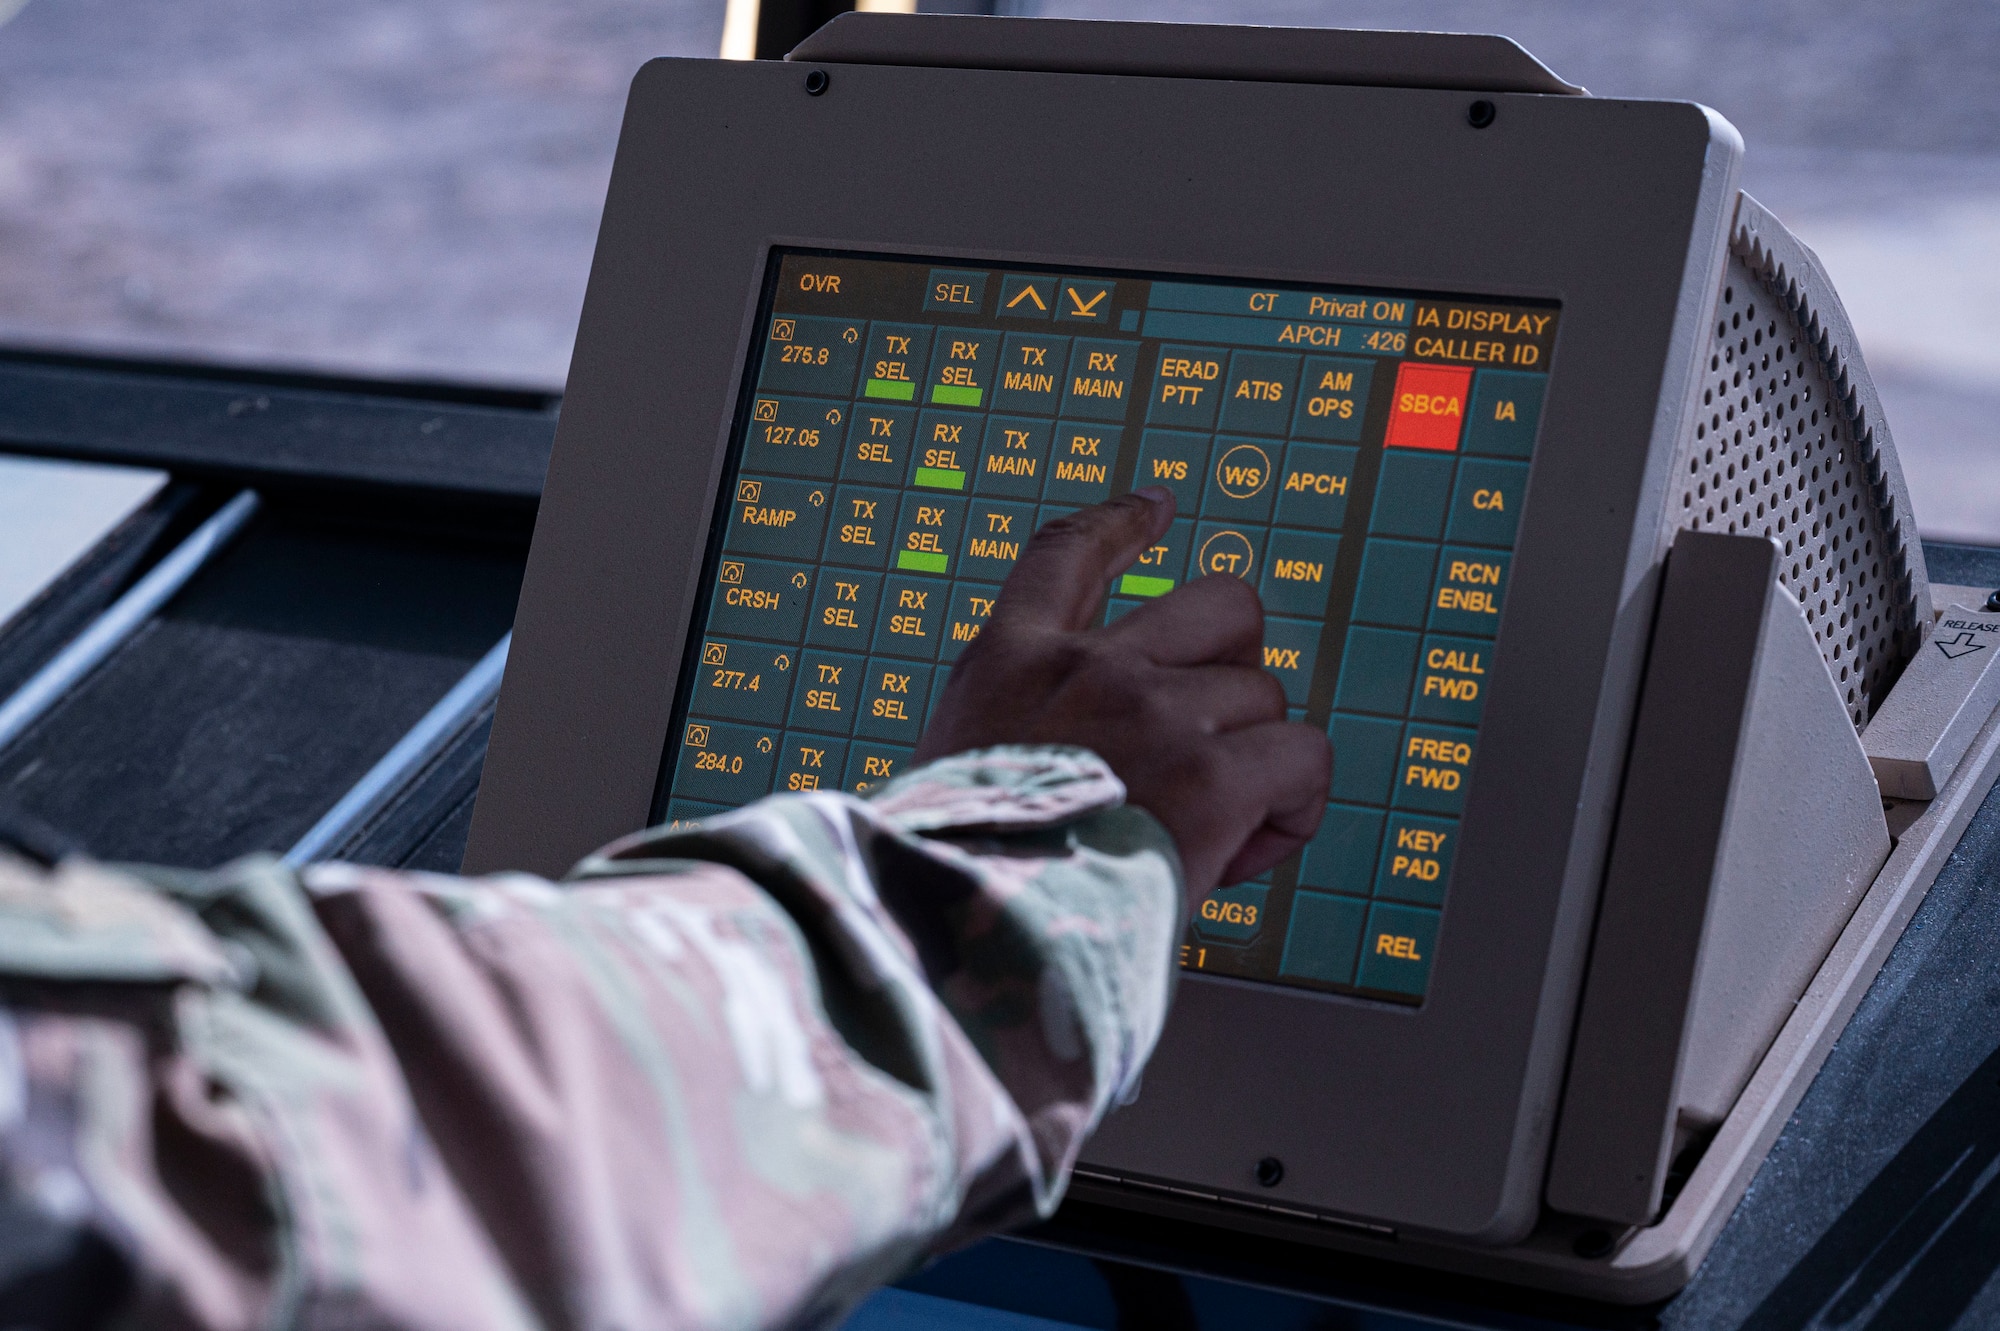 An Airman from the 54th Operations Support Squadron uses the enhanced terminal voice switch machine to perform a line check at Holloman Air Force Base, New Mexico, Jan. 24, 2024. The ETVS control panel allows controllers to communicate with other ATC facilities through different radio frequencies and direct communication lines. (U.S. Air Force photo by Airman 1st Class Michelle Ferrari)